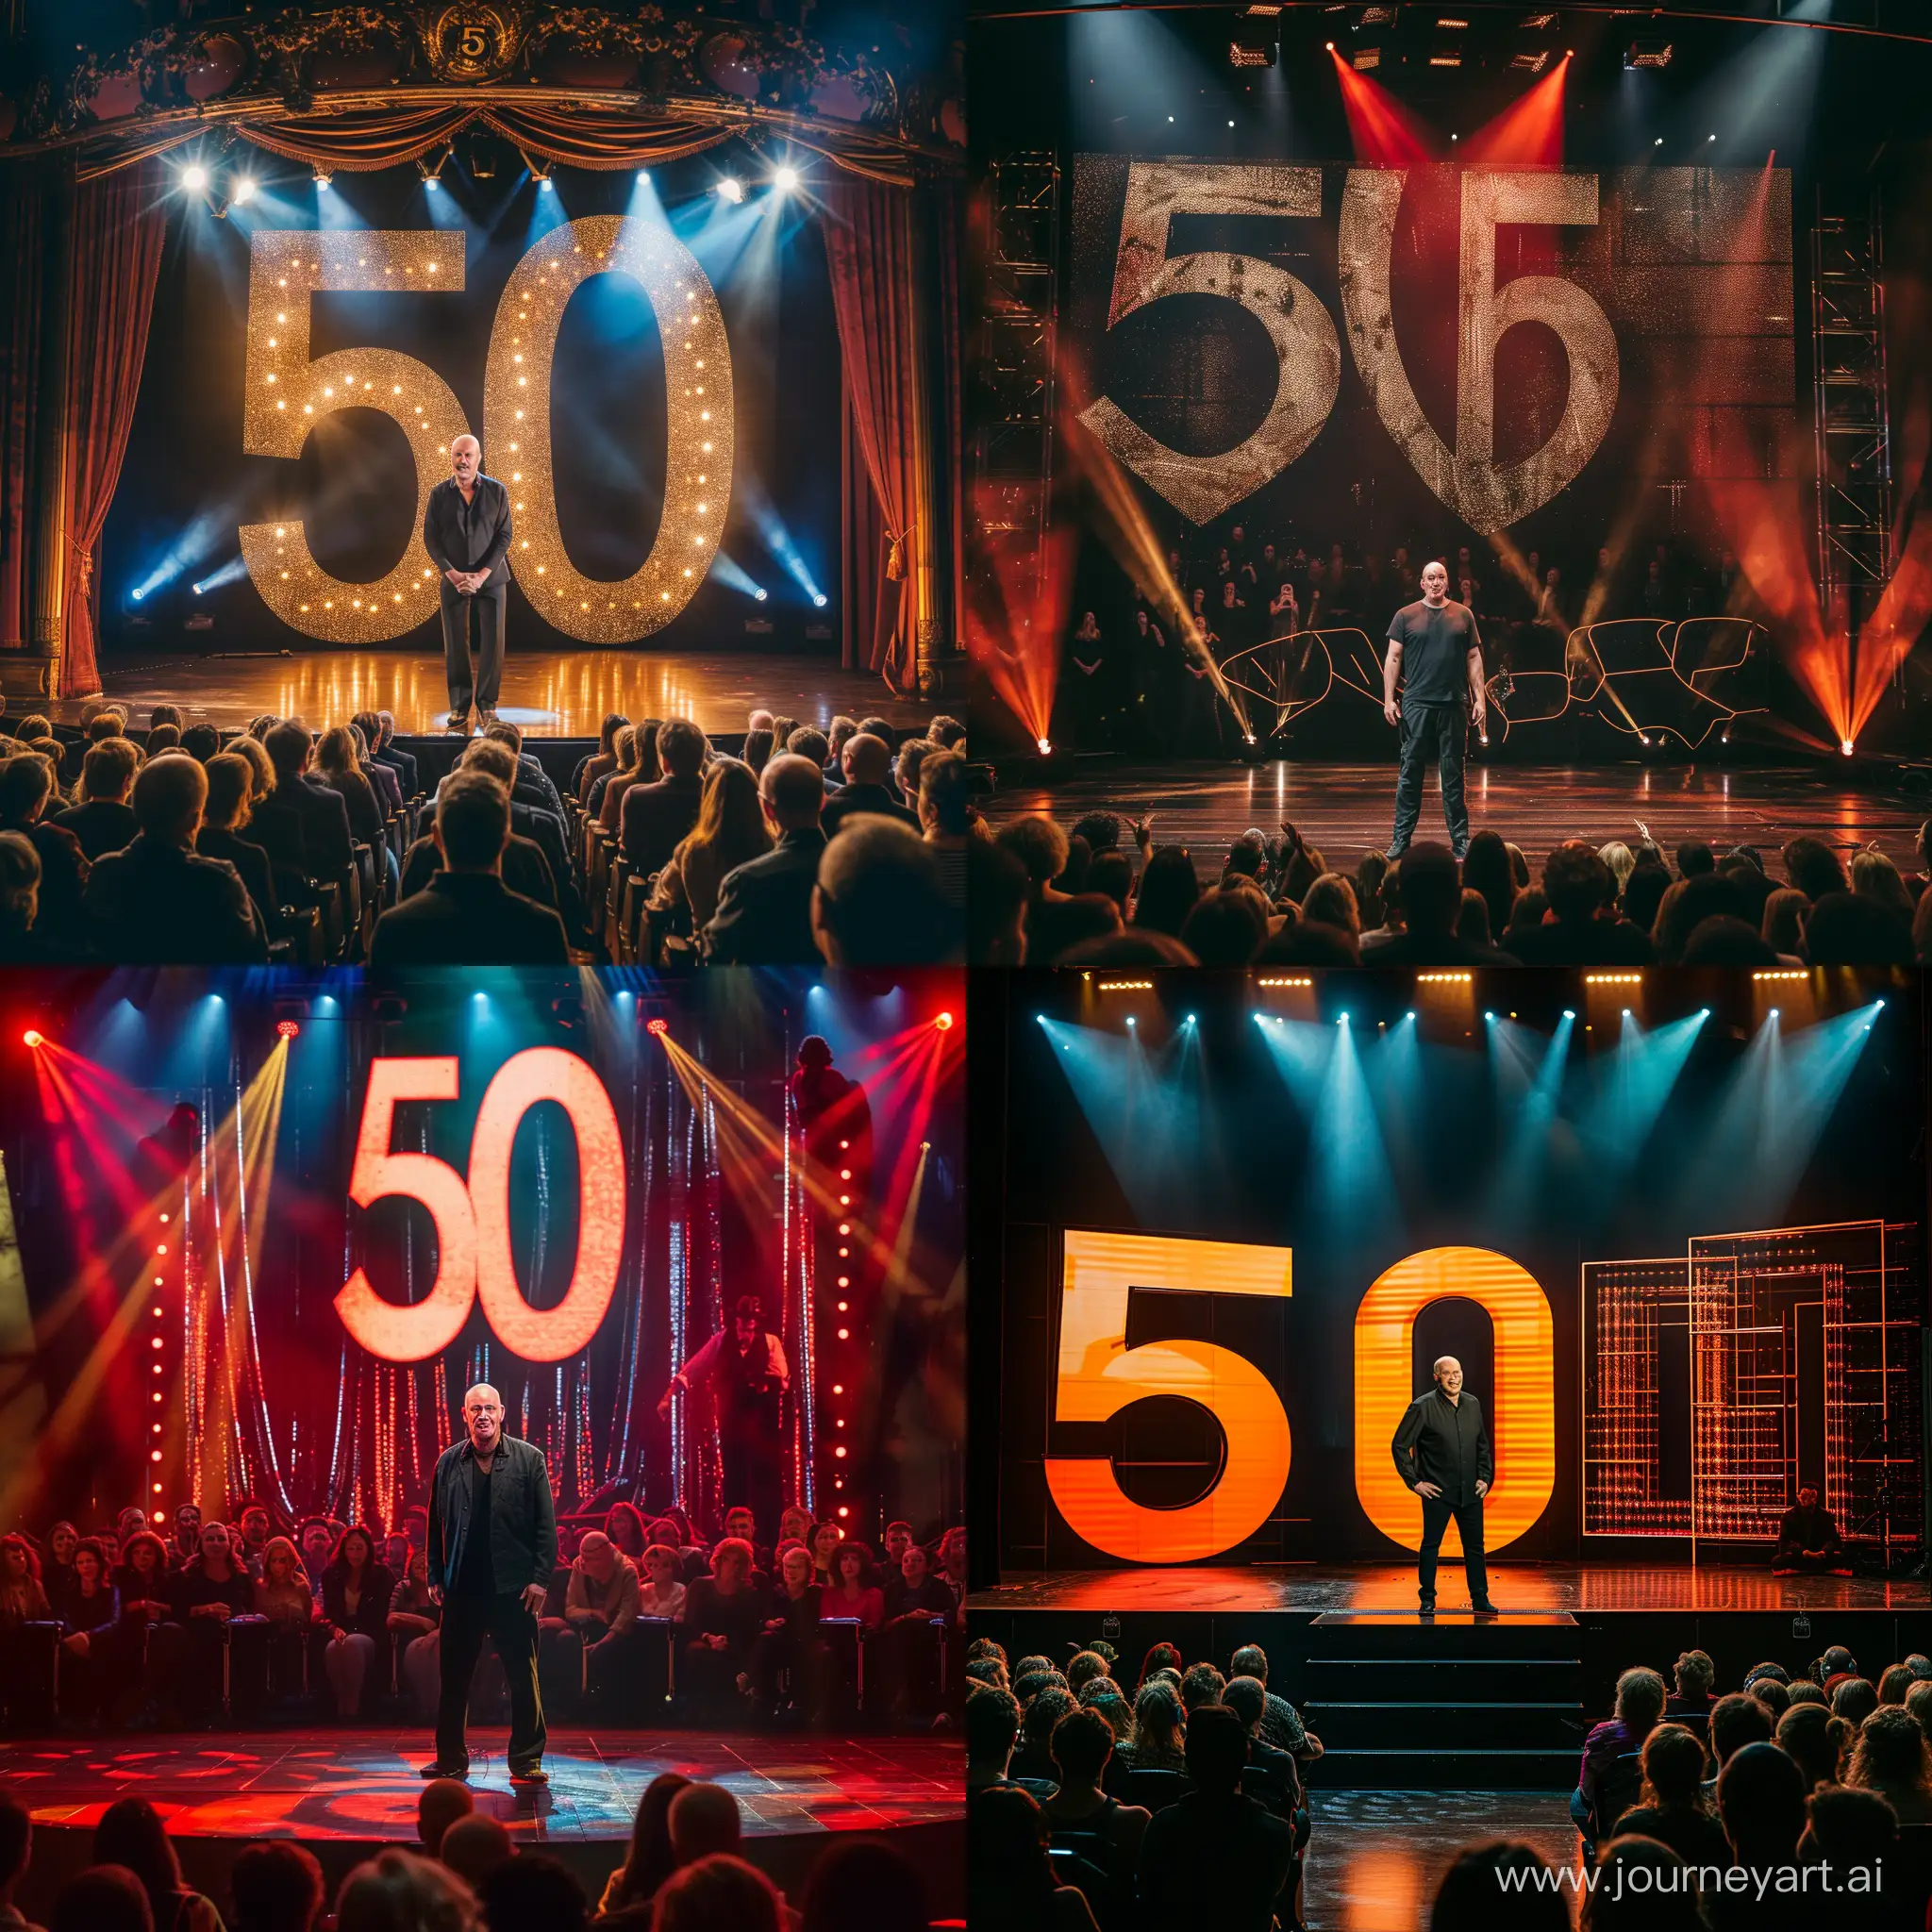 Epic-50th-Anniversary-Celebration-with-Bald-Man-on-Theater-Stage